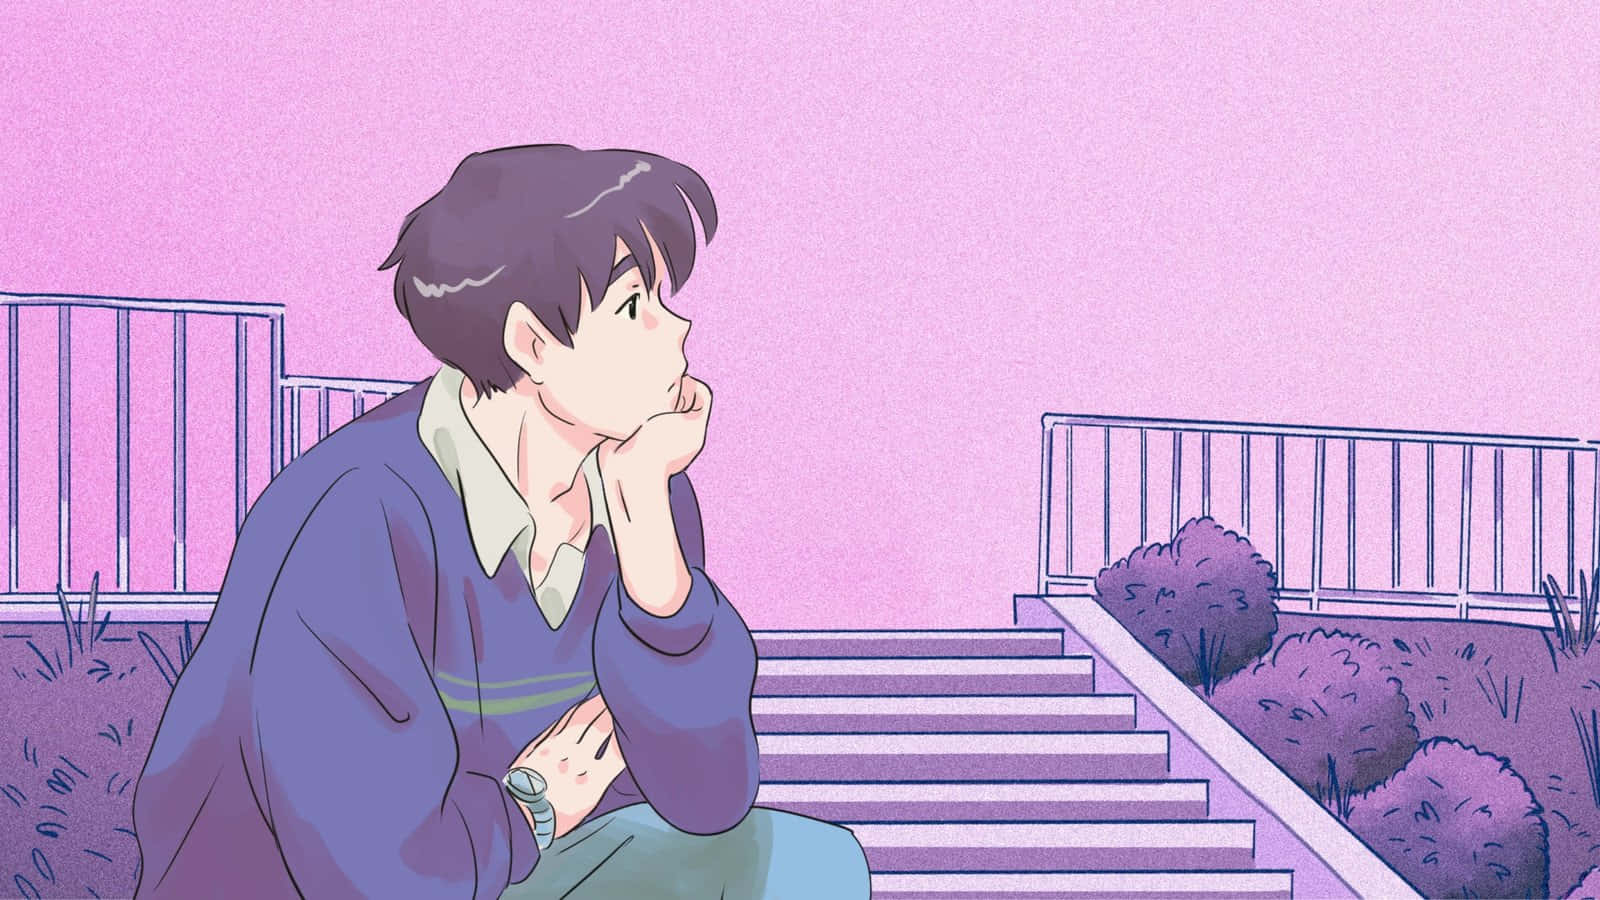 Enjoy a peaceful moment surrounded by a beautiful aesthetic pink anime background.